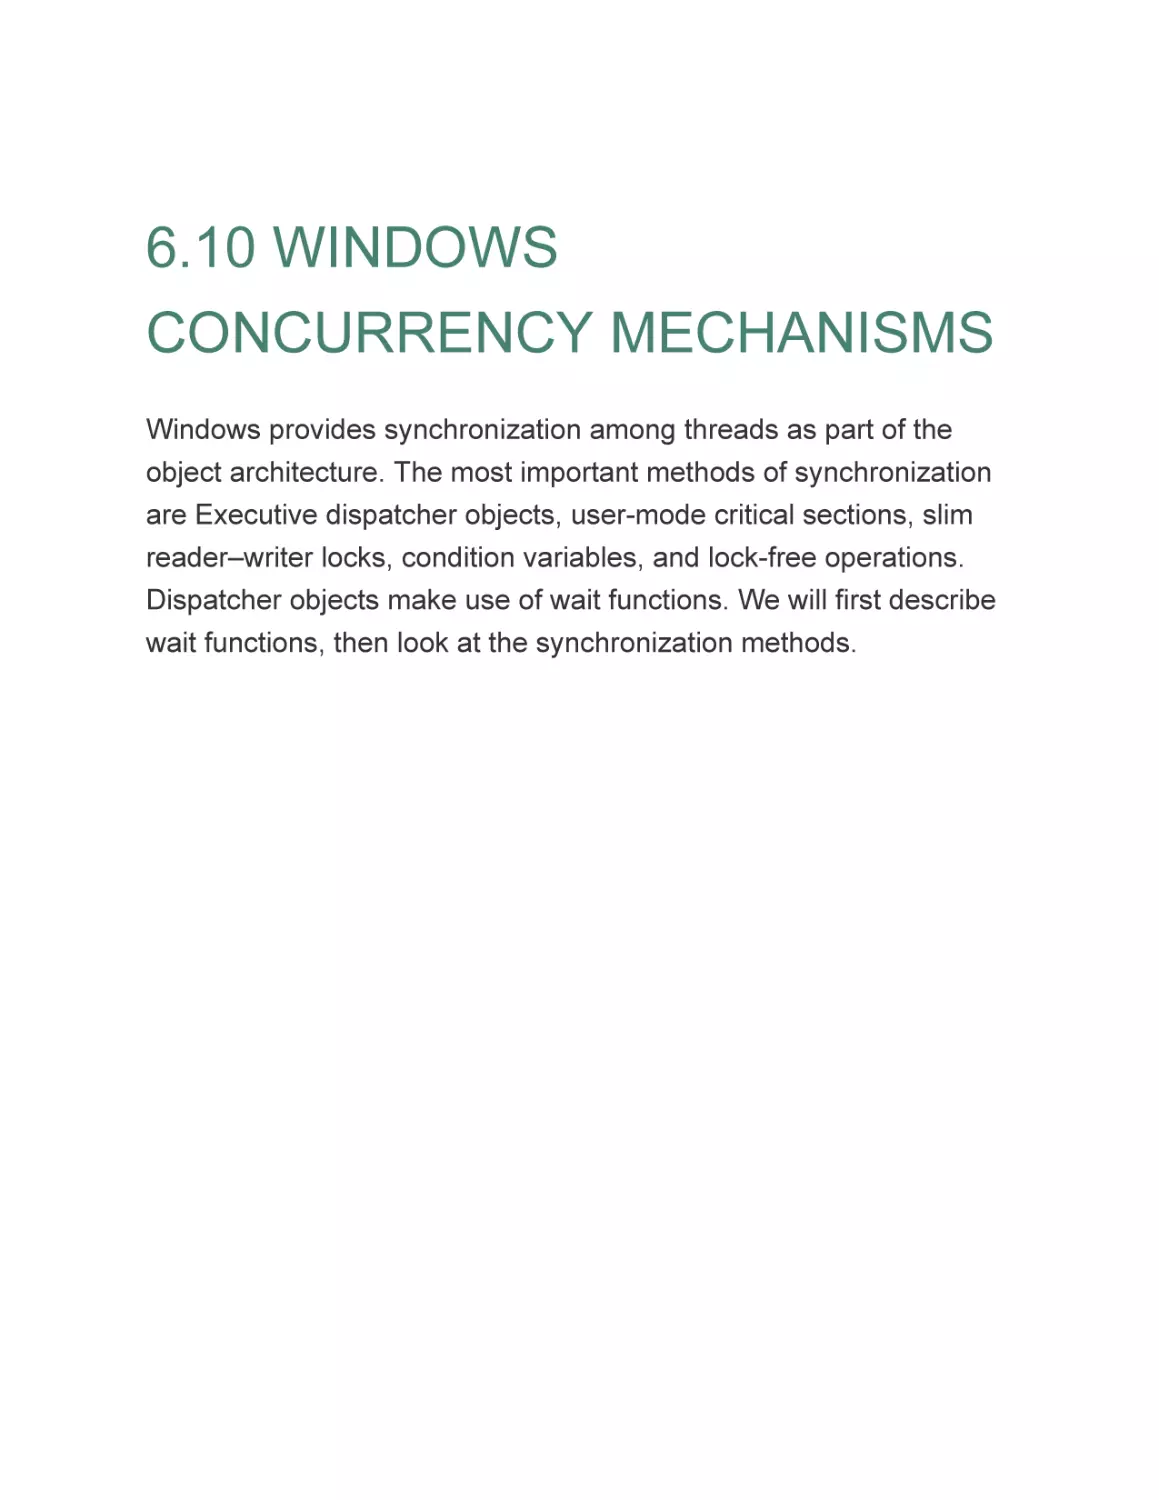 6.10 WINDOWS CONCURRENCY MECHANISMS